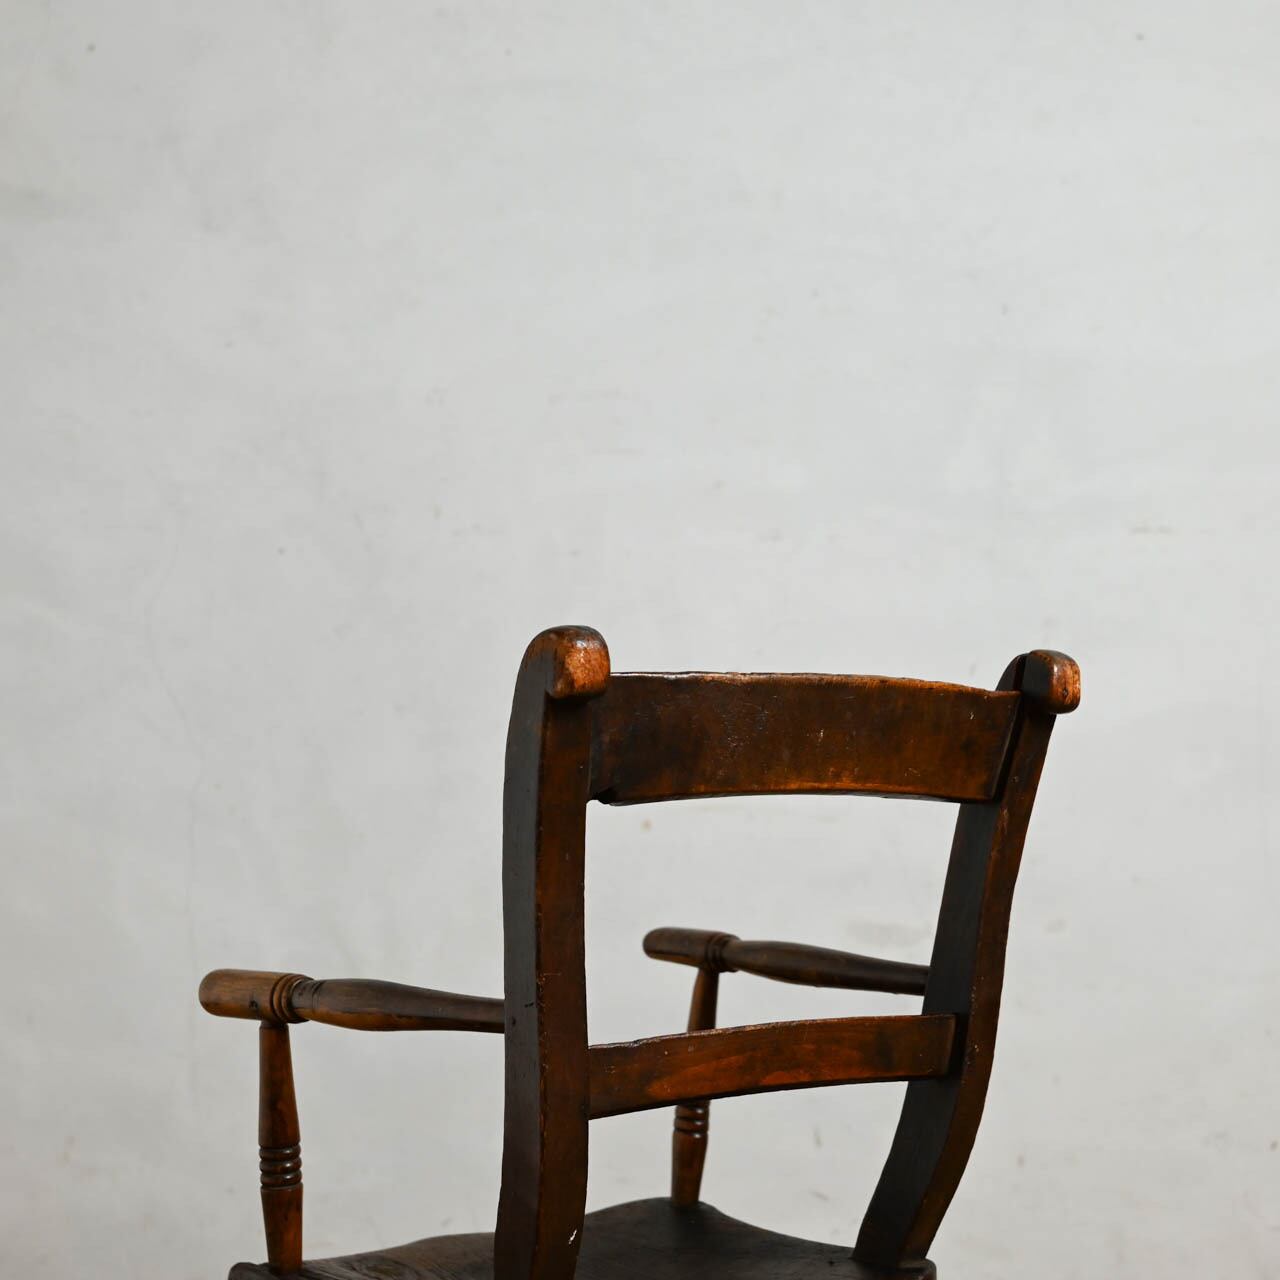 Kids Arm Chair / キッズアームチェア〈椅子・スクールチェア・ドールチェア・アンティーク・ヴィンテージ〉112656 |  SHABBY'S MARKETPLACE　アンティーク・ヴィンテージ 家具や雑貨のお店 powered by BASE